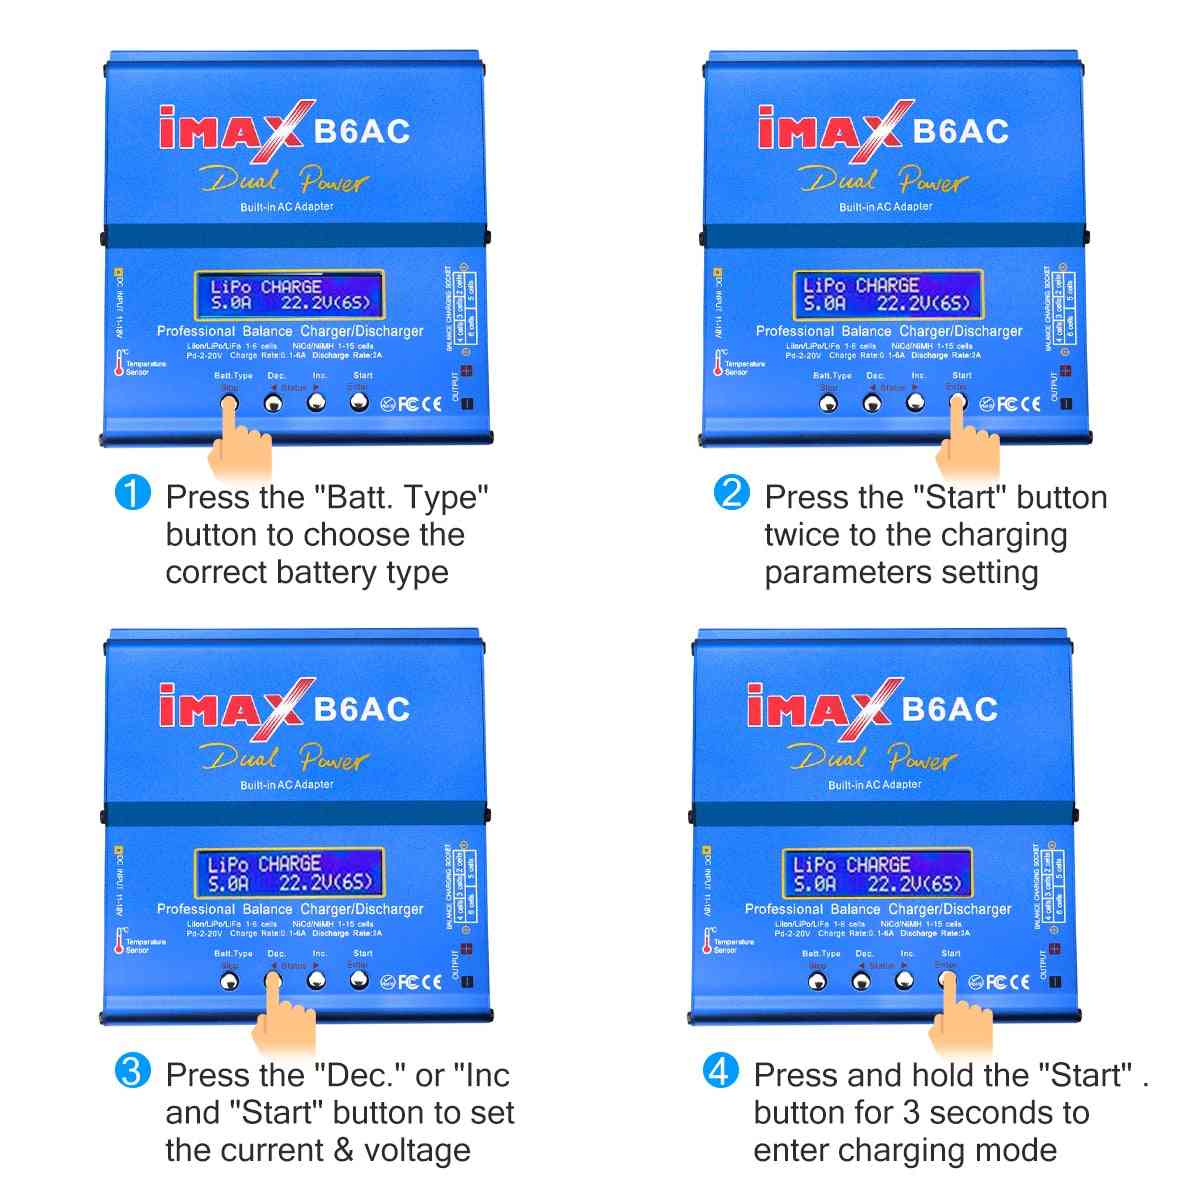 Htrc Imax Ac Rc Charger Dual Channel Balance, Digital Lcd Screen Li-ion Battery Discharger